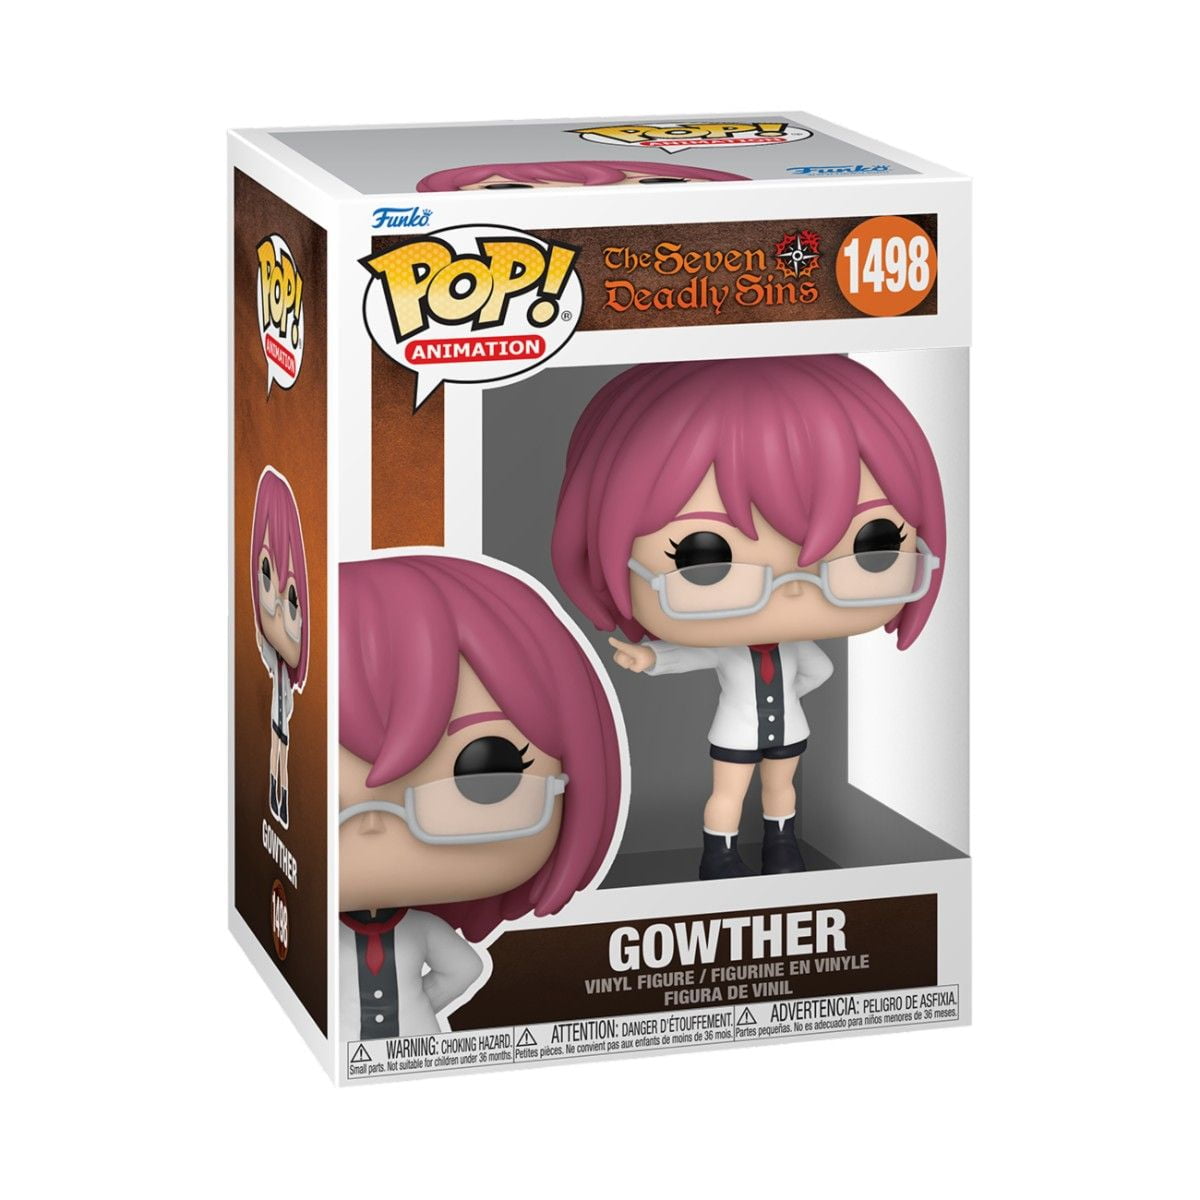 Gowther - Seven Deadly Sins - Funko POP! Animation (1498)